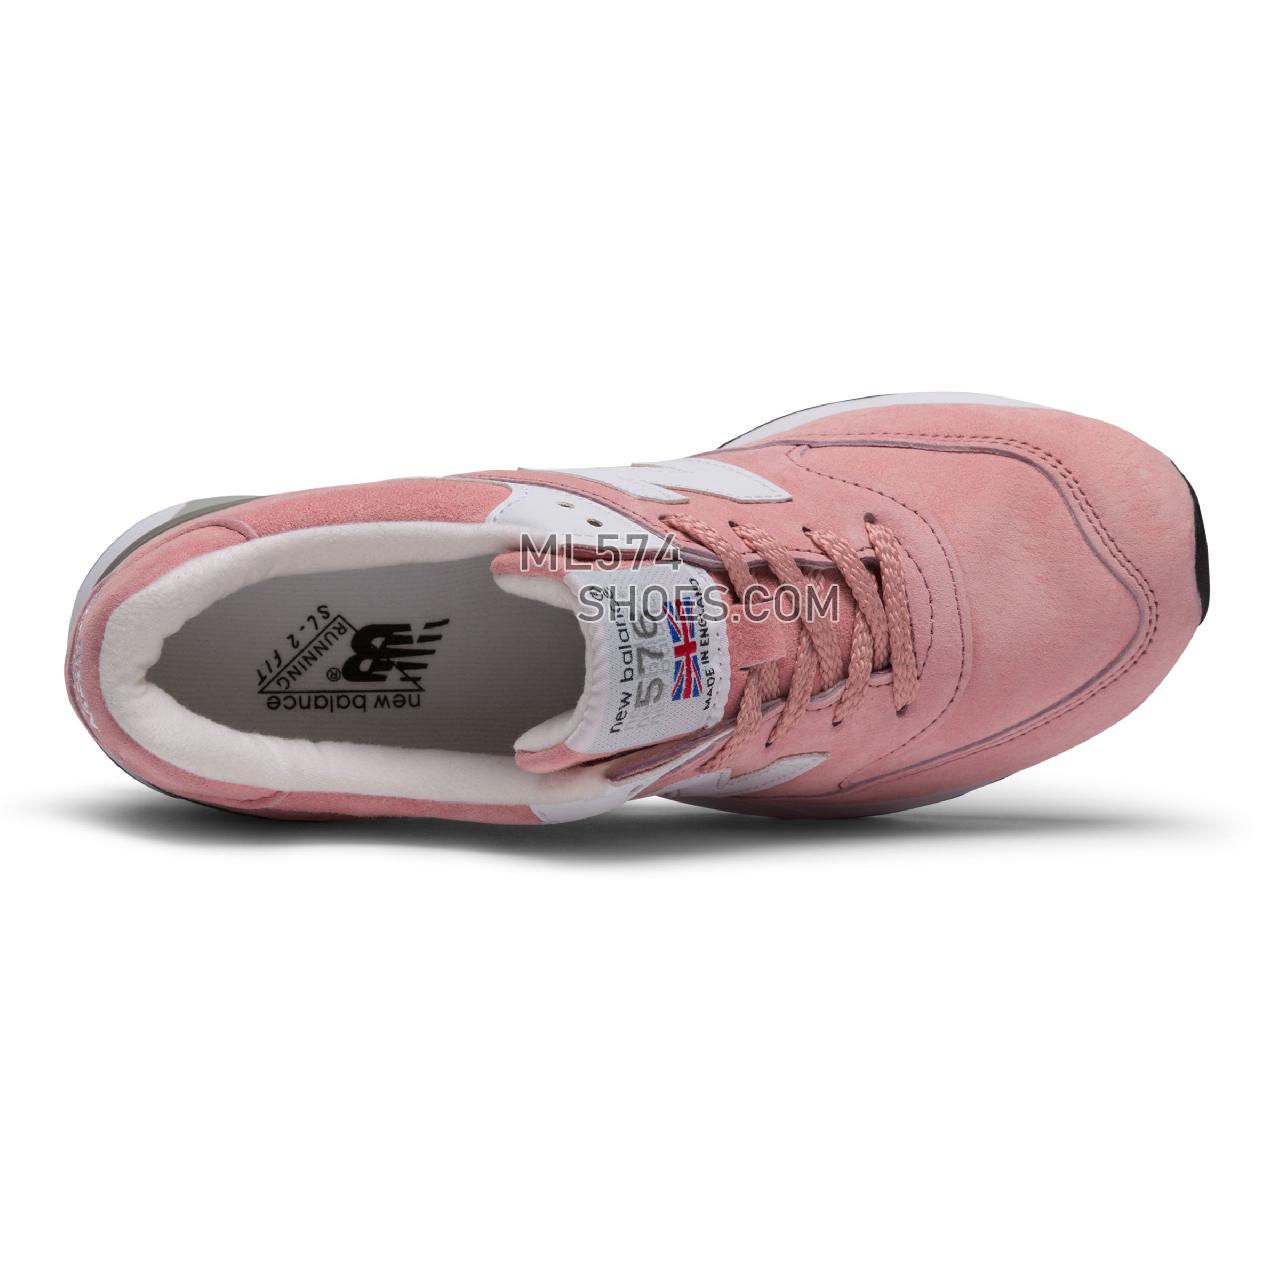 New Balance 576 Made in UK - Men's 576 Made in UK Classic W576-PS3 - Faded Rose with White - W576PNK